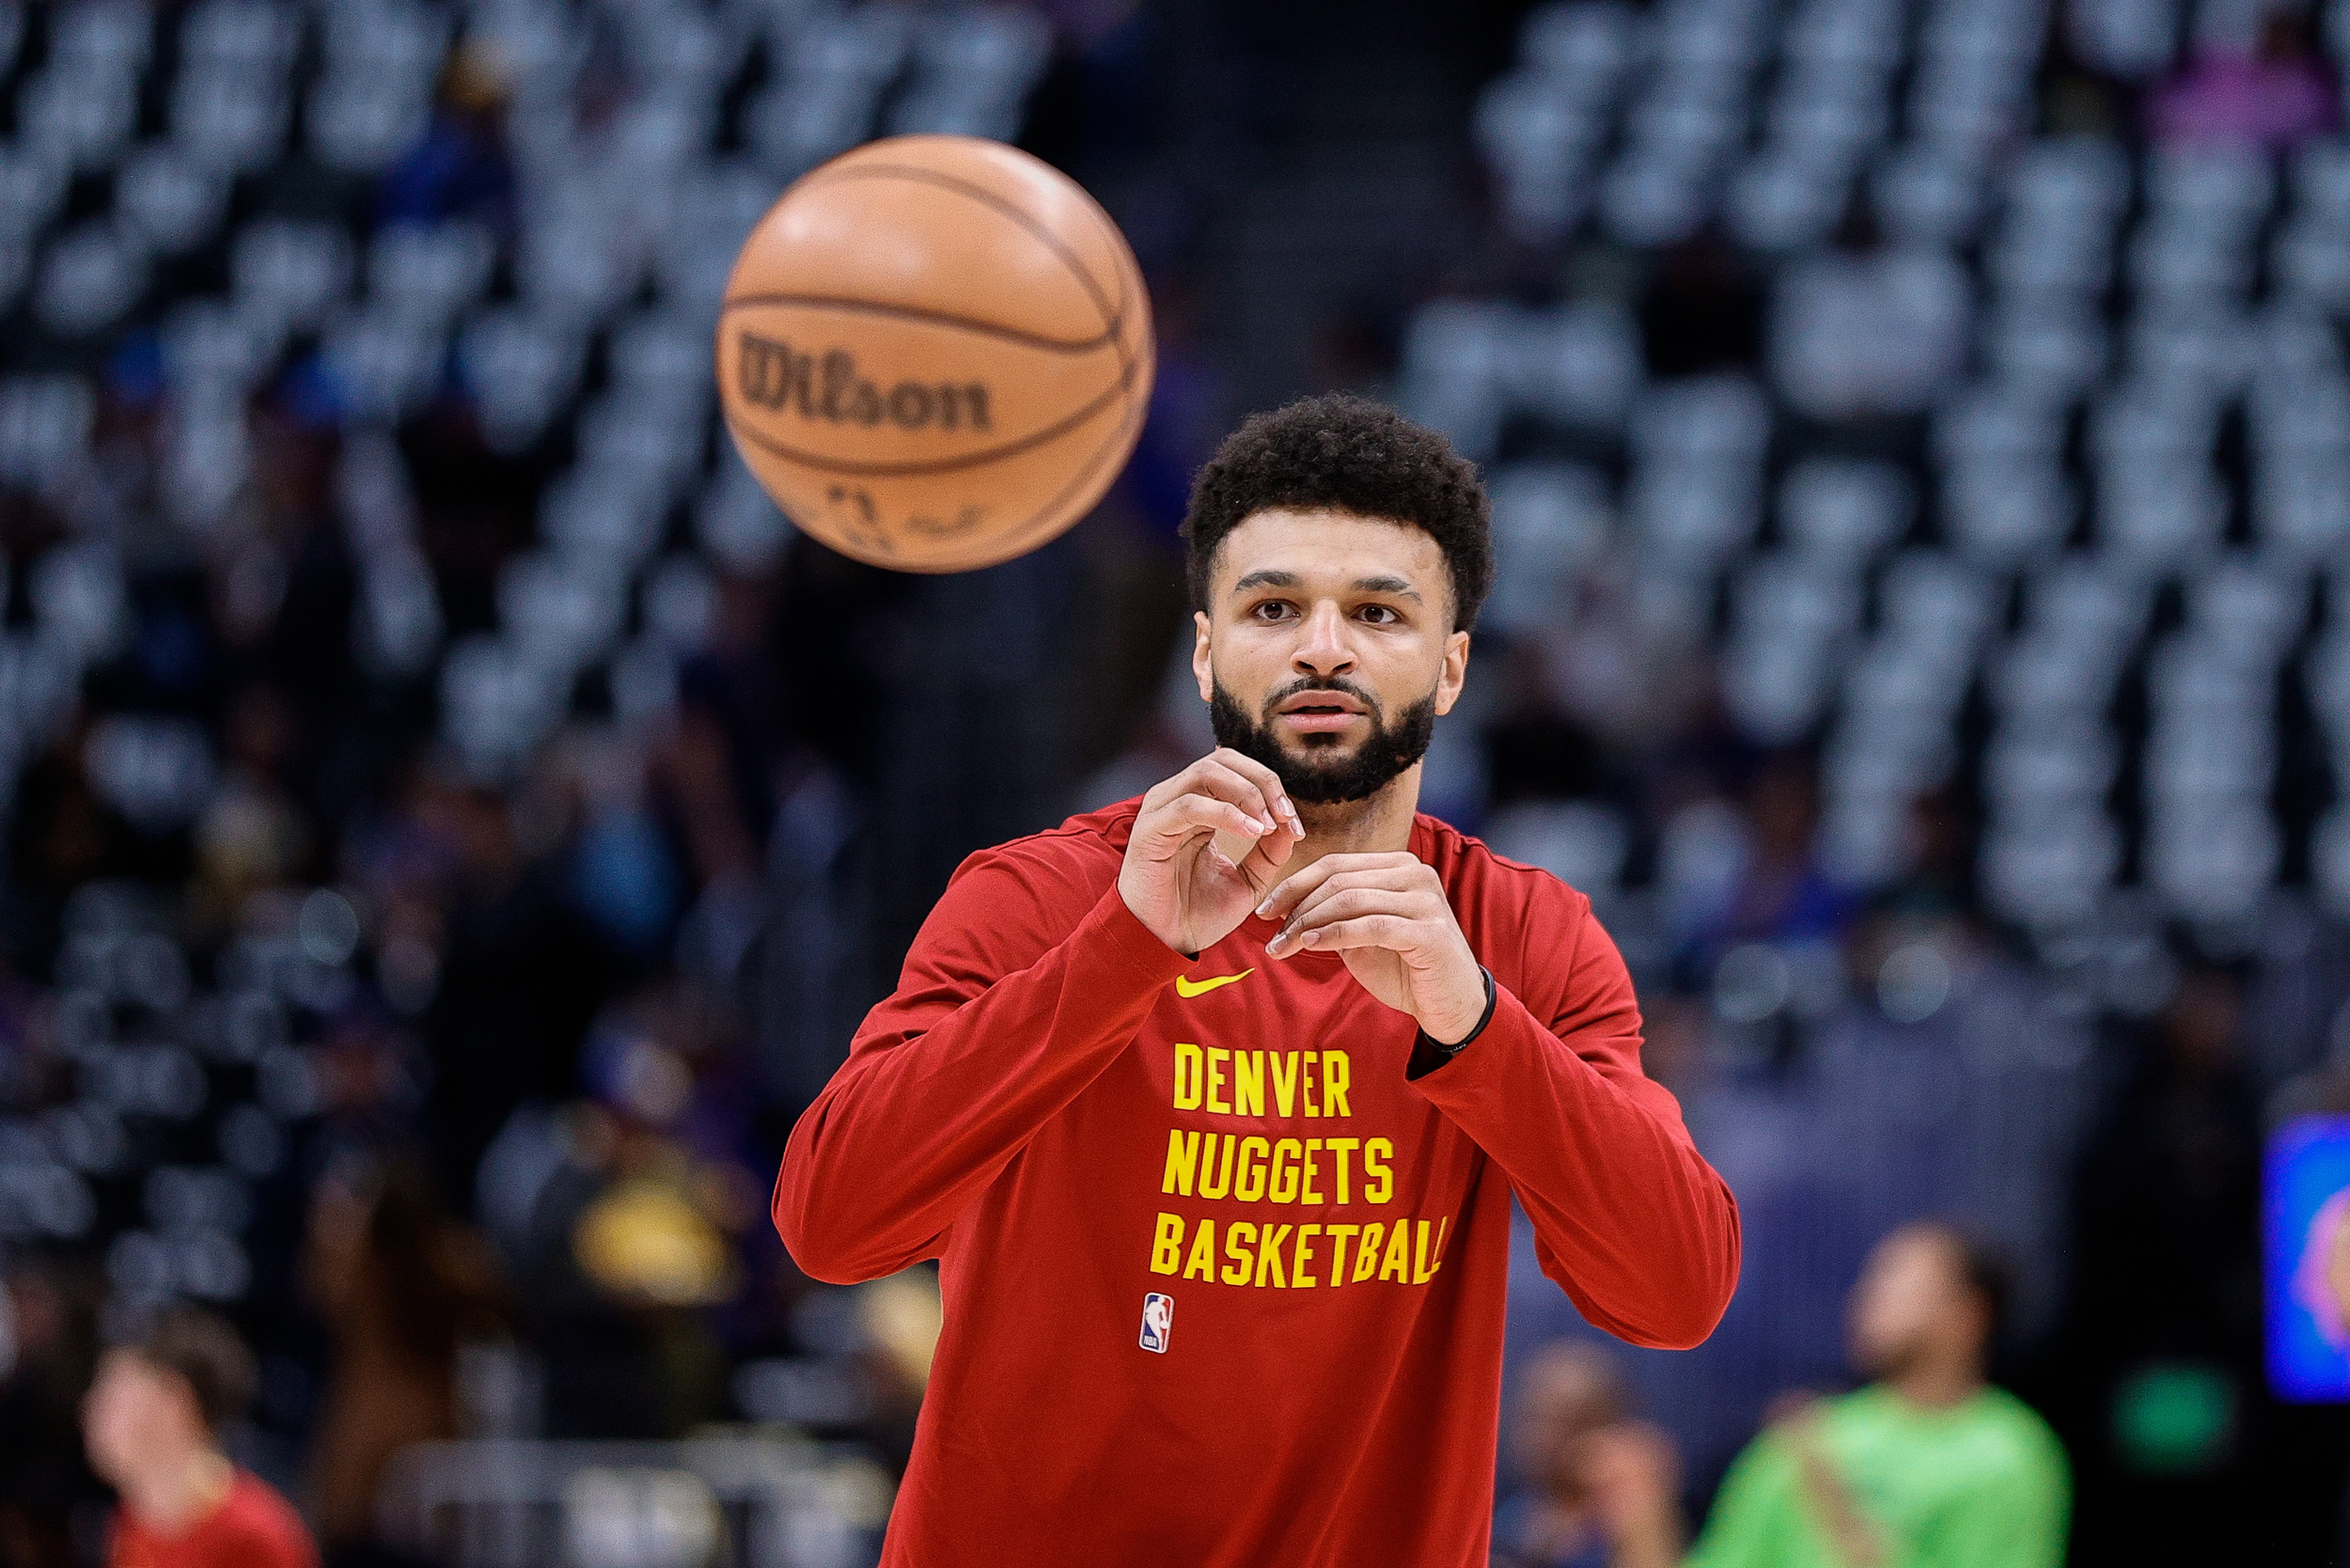 jamal murray seen throwing object onto court during nuggets’ meltdown